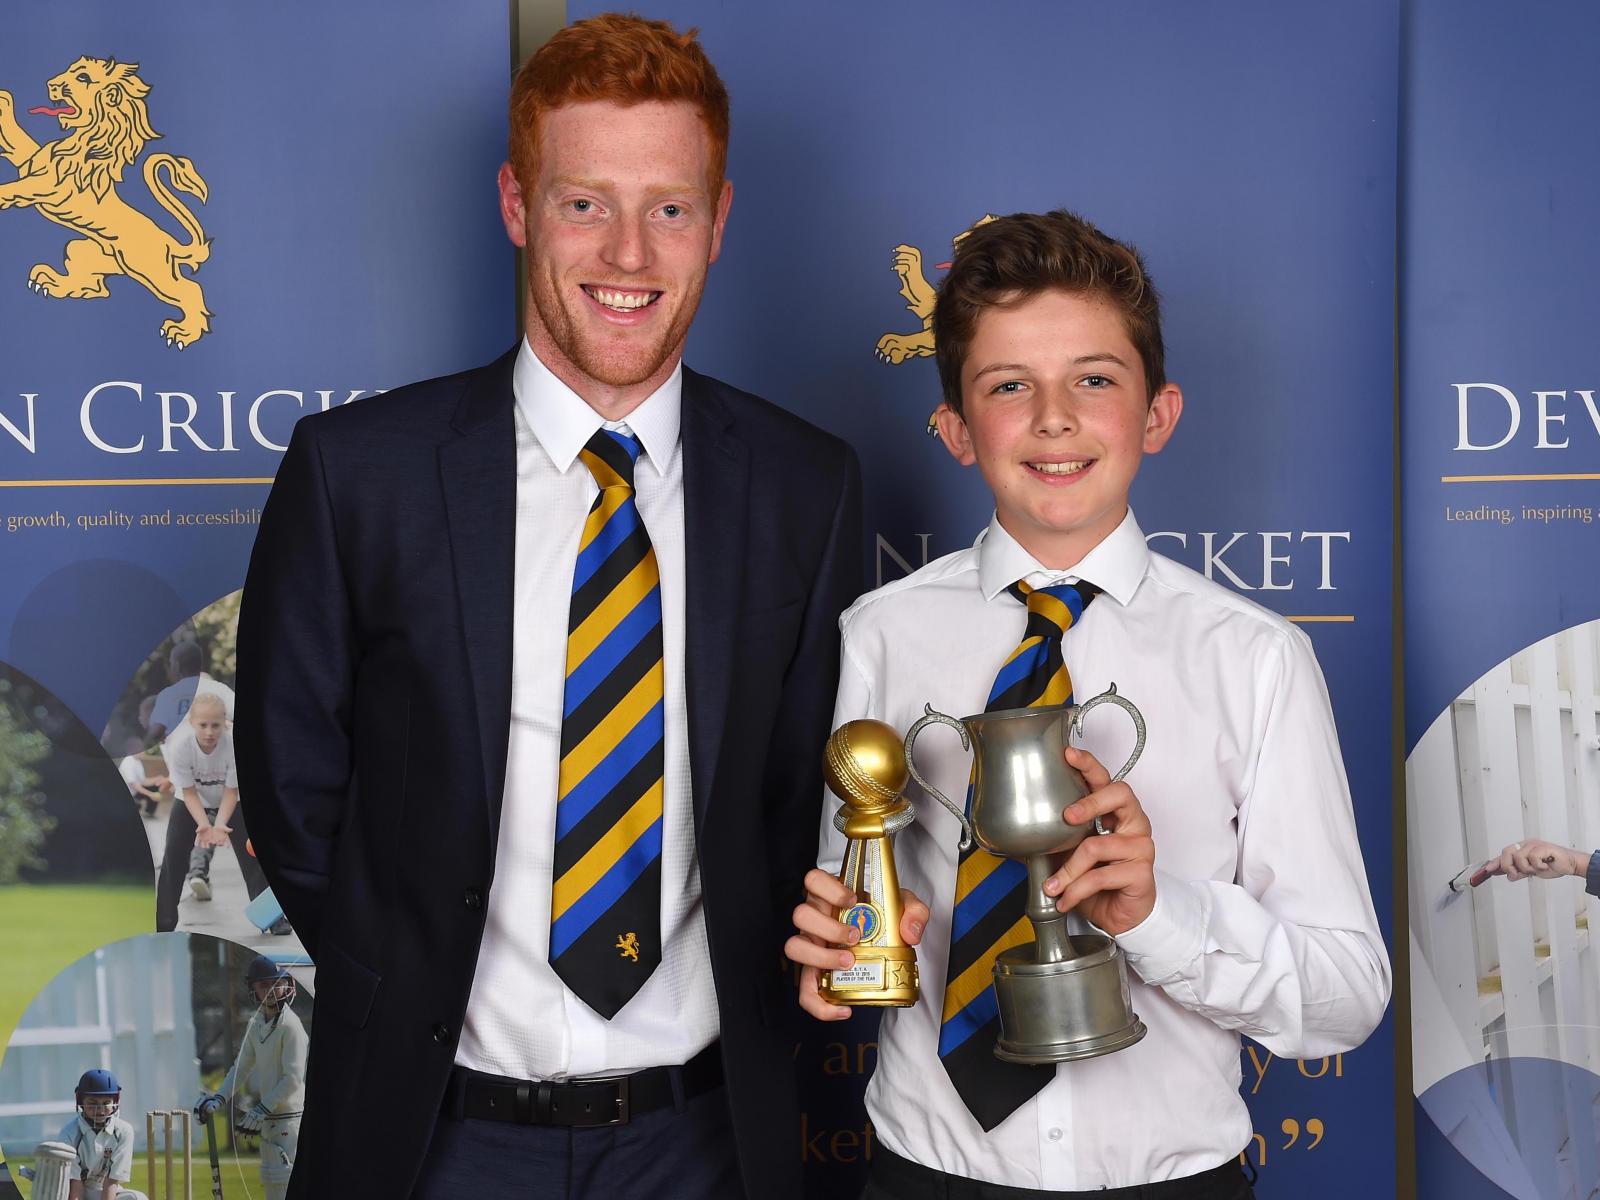 Max Hancock (right) at the Devon Cricket Awards collecting a trophy from 